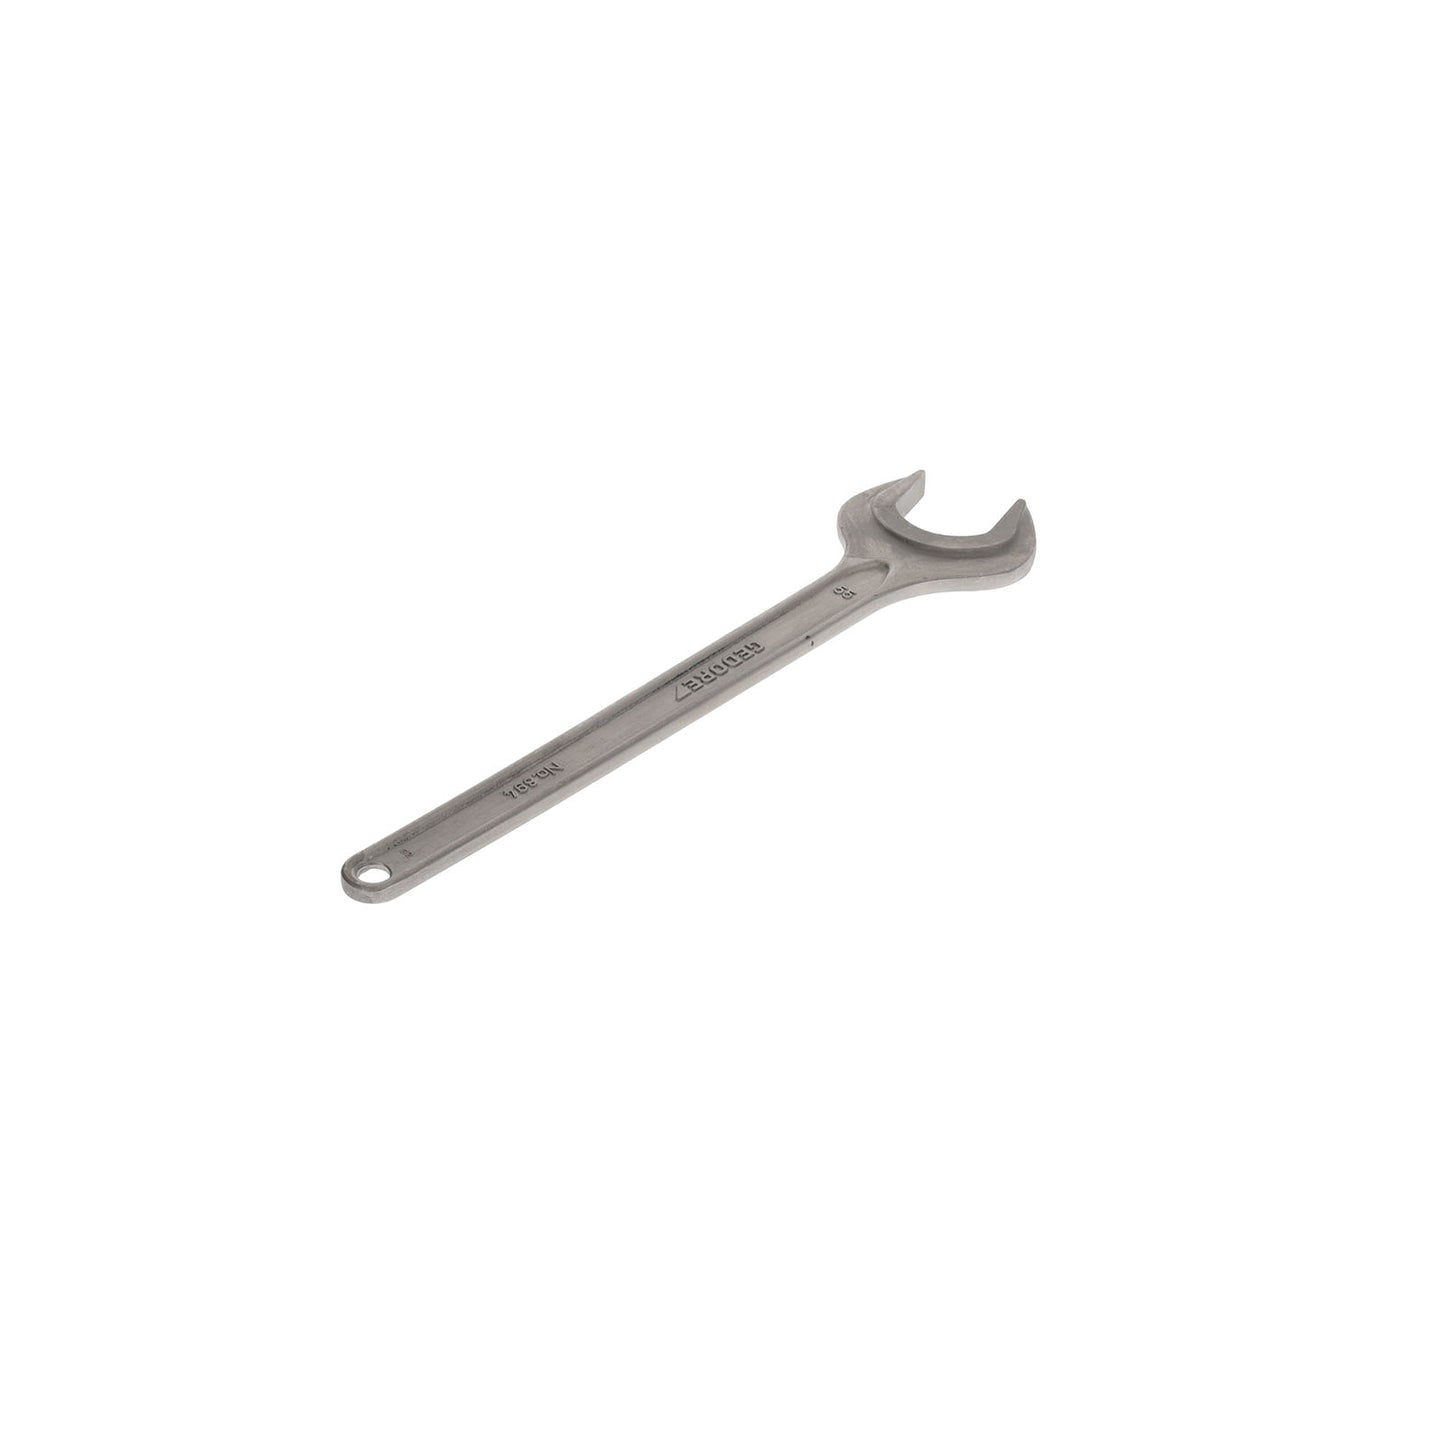 GEDORE 894 55 - 1 Open End Wrench, 55mm (6577270)